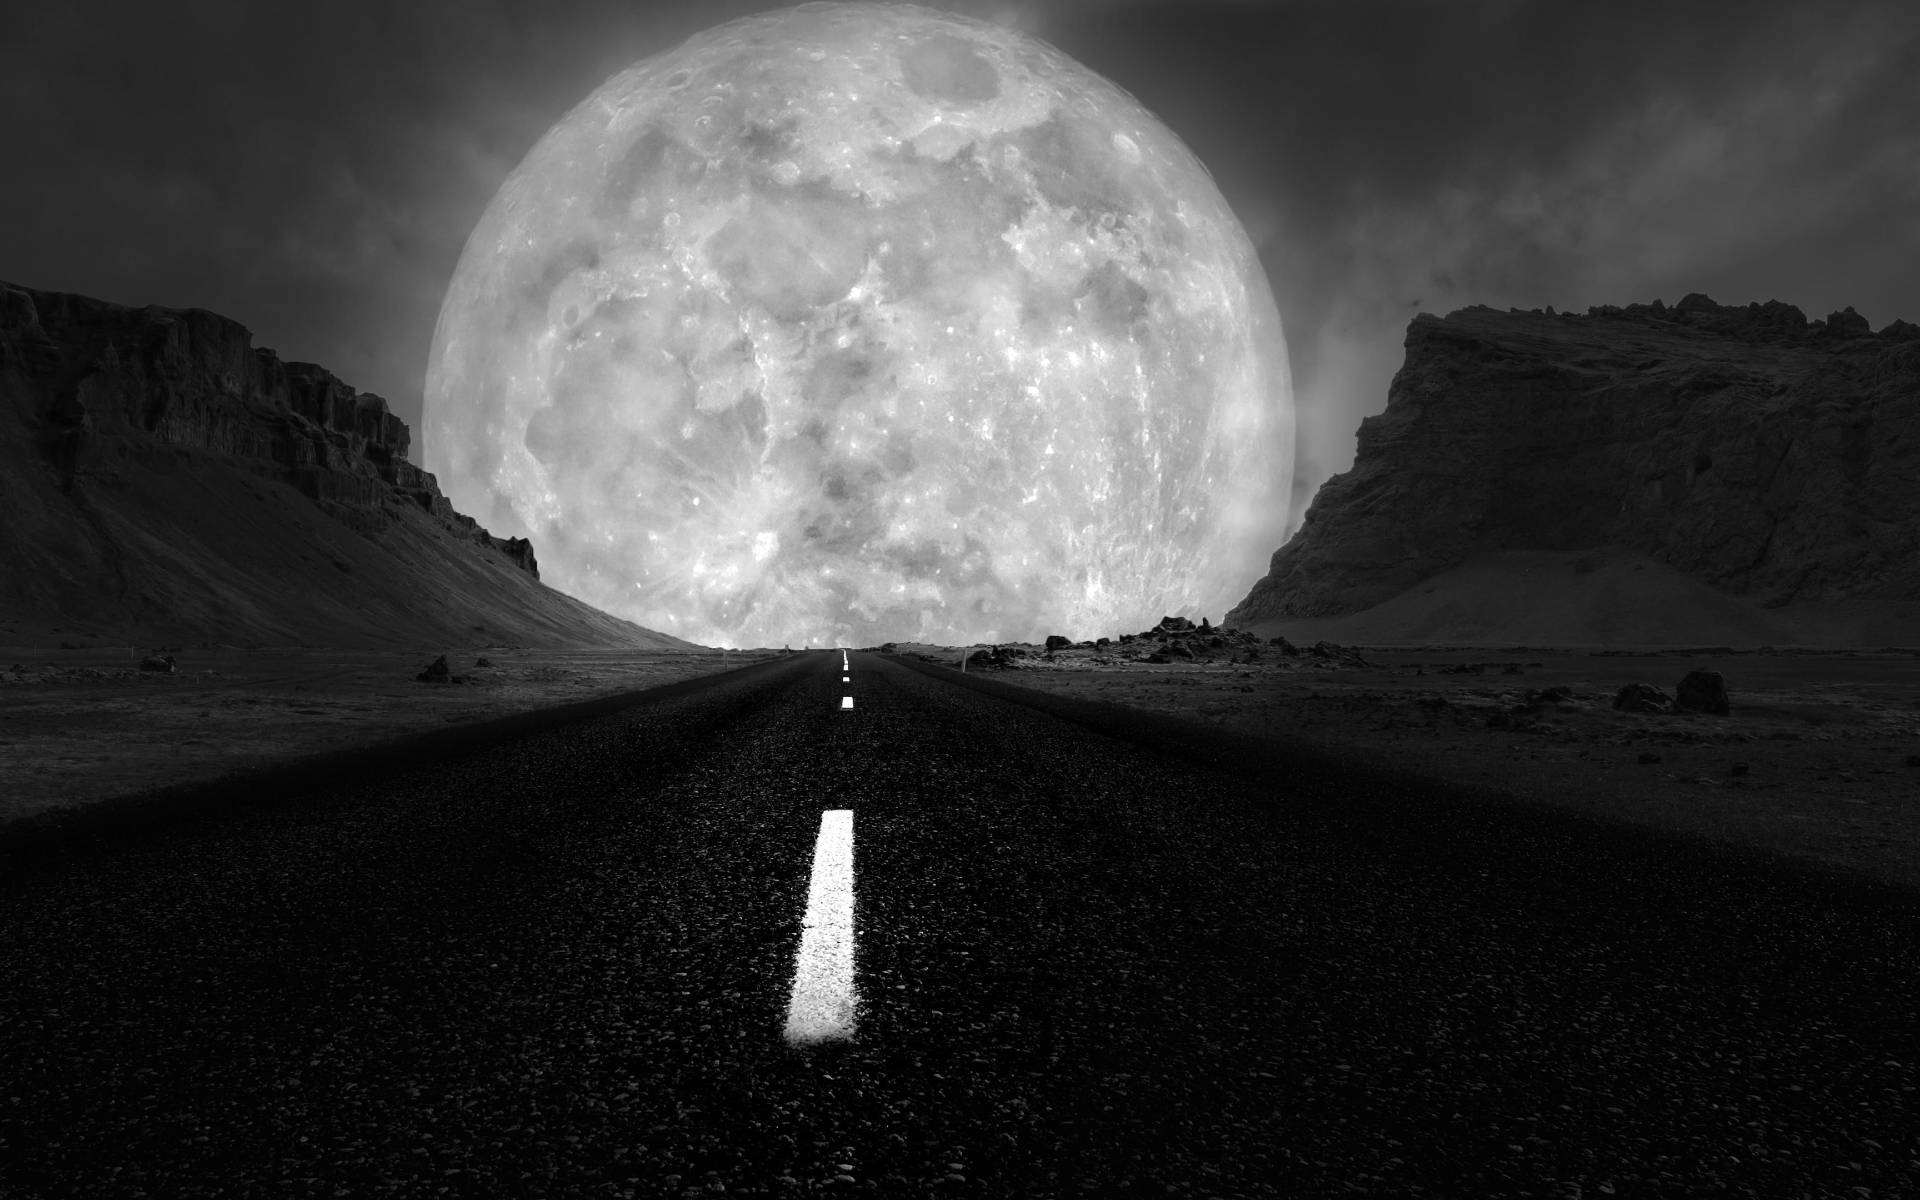 A Striking Image Of The Grayscale Galaxy Moon Over A Lonely Road